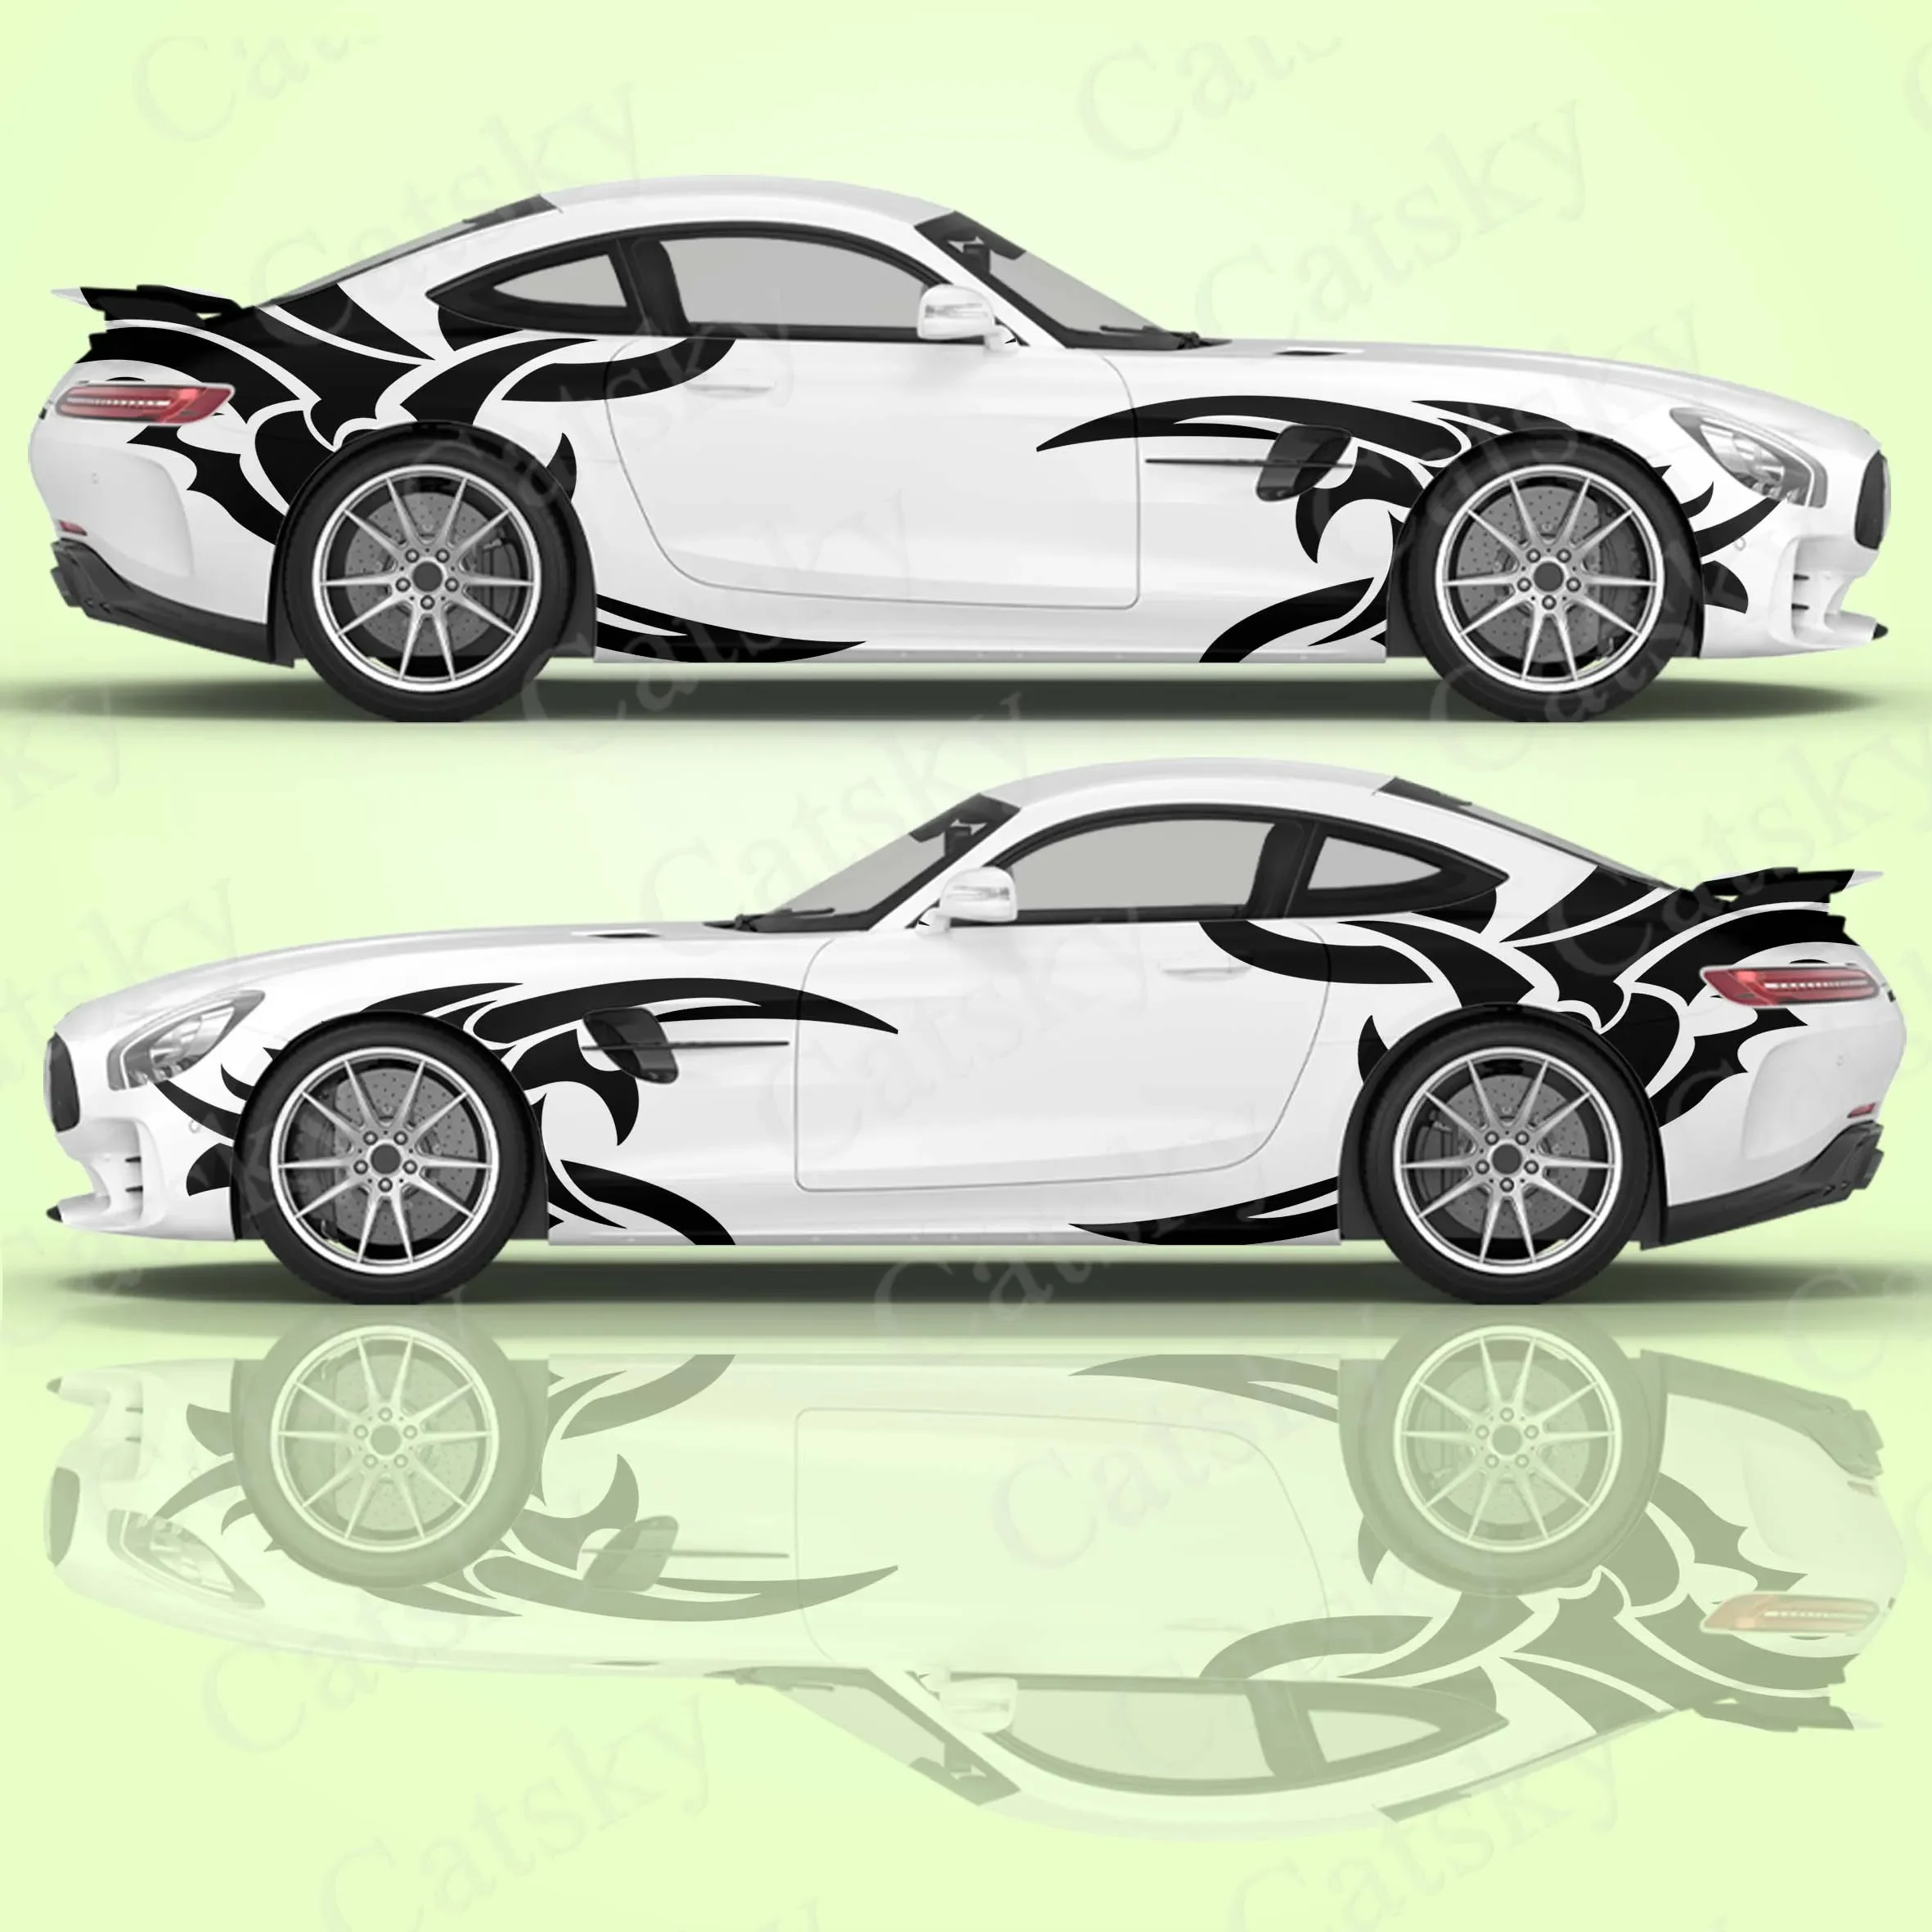 Flame Design Pattern Design Universal Suitable for Car Wrapping Car Sticker  Side Graphic Lightning Stripe Sticker Decal - AliExpress